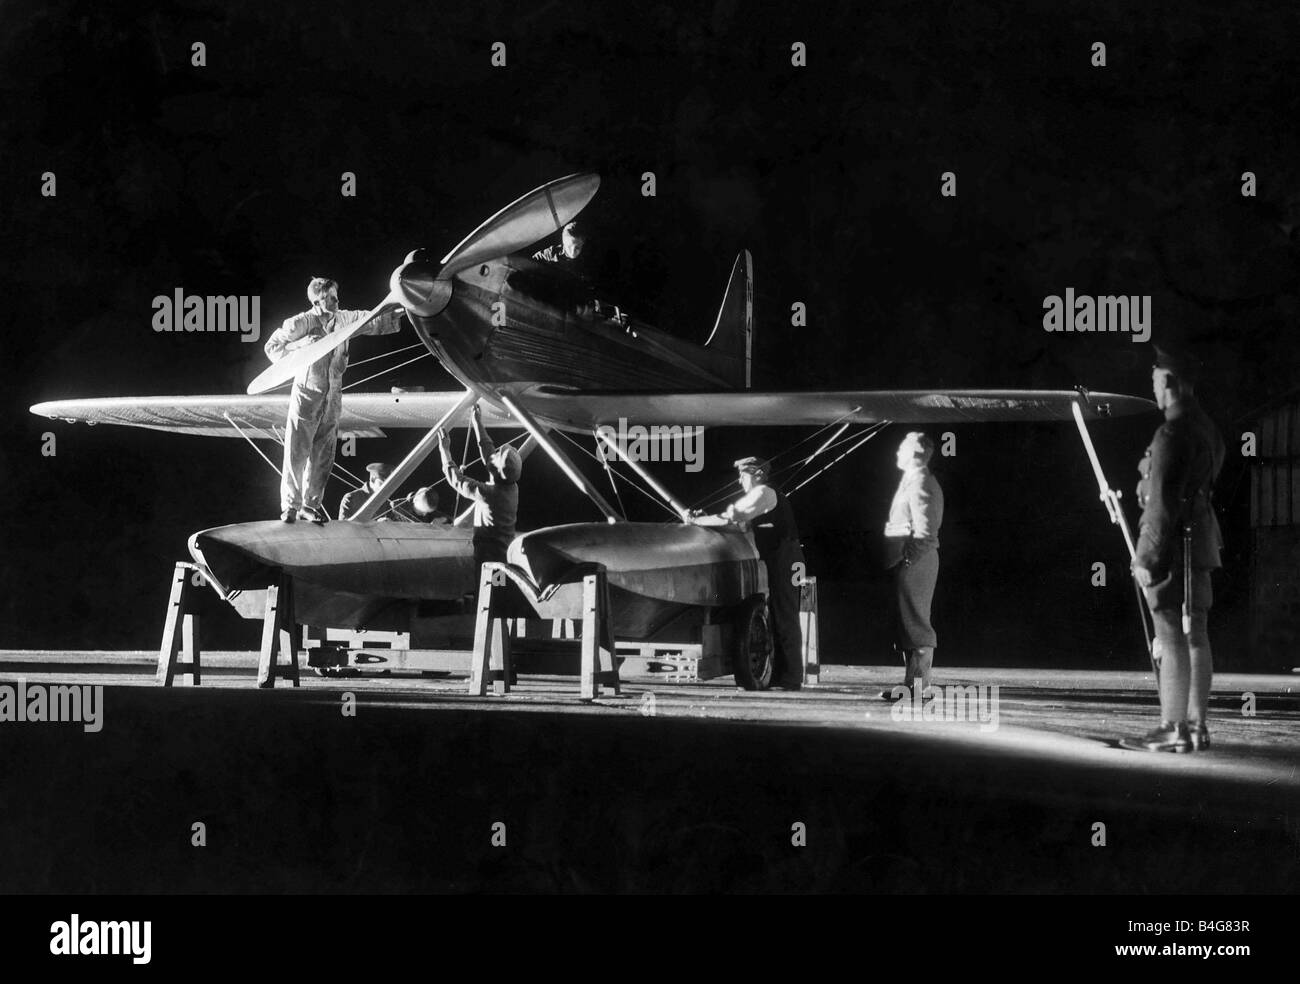 R J Mitchell Aircraft Designer August 1929 Working by searchlight on the Supermarine S6 engine at 10pm at night Reginald Mitchell the designer in his plus fours trousers seen at the right oversees work being carried out on the seaplane An armed guard stands nearby with his rifle and bayonet Stock Photo